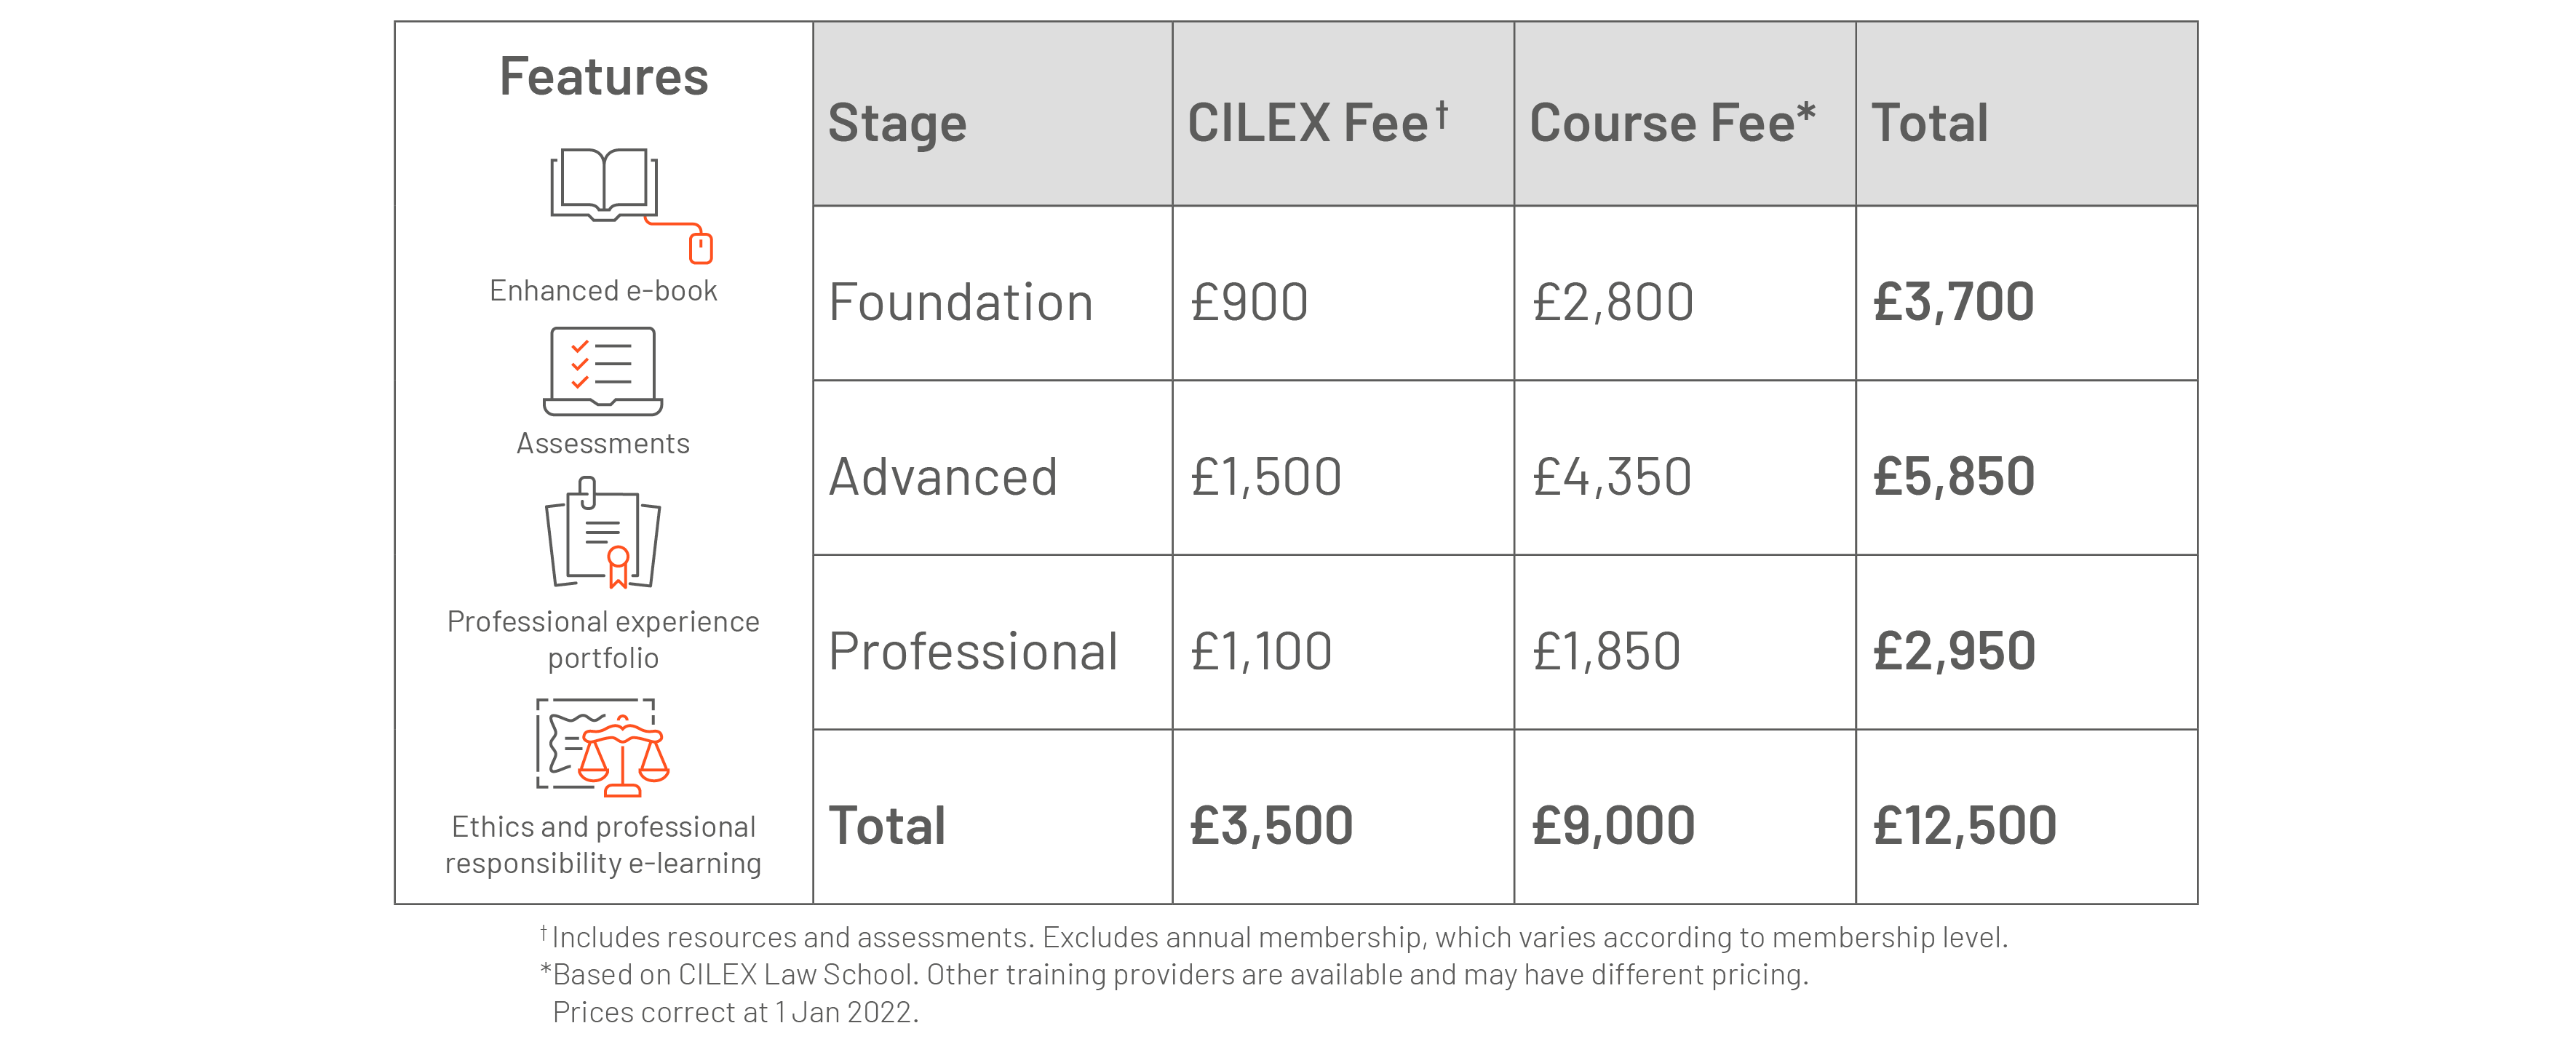 CPQ Prices: CPQ Foundation = £3,700. CPQ Advanced = £5,850. CPQ Professional = £2,950. Total = £12,500. Price for each stage includes CILEX Fee for resources and assessments, and Course Fee based on CILEX Law School. Other training providers are available and may have different pricing. Excludes annual membership which varies according to member level. Prices correct at 1 Jan 2020. 